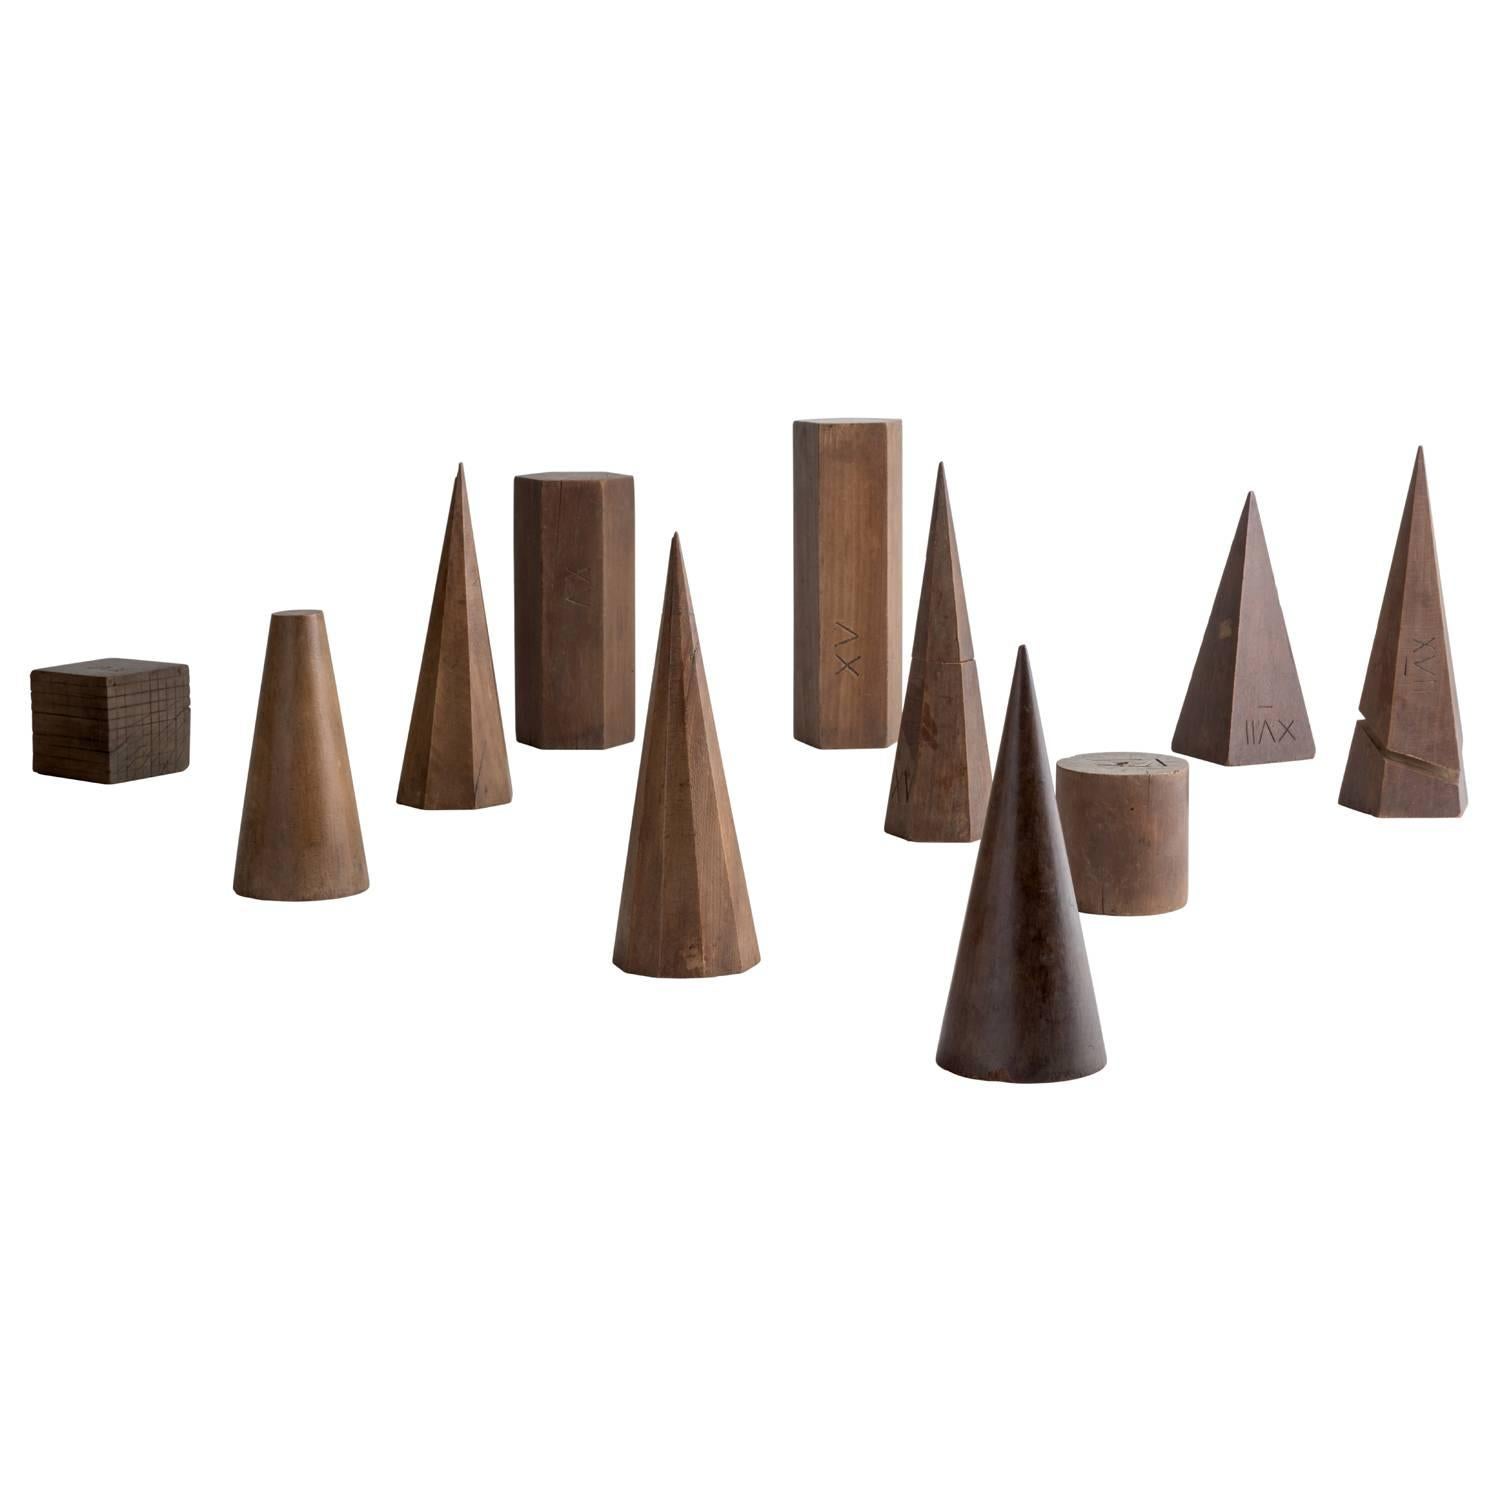 Set of 11 Wooden Geometric Forms